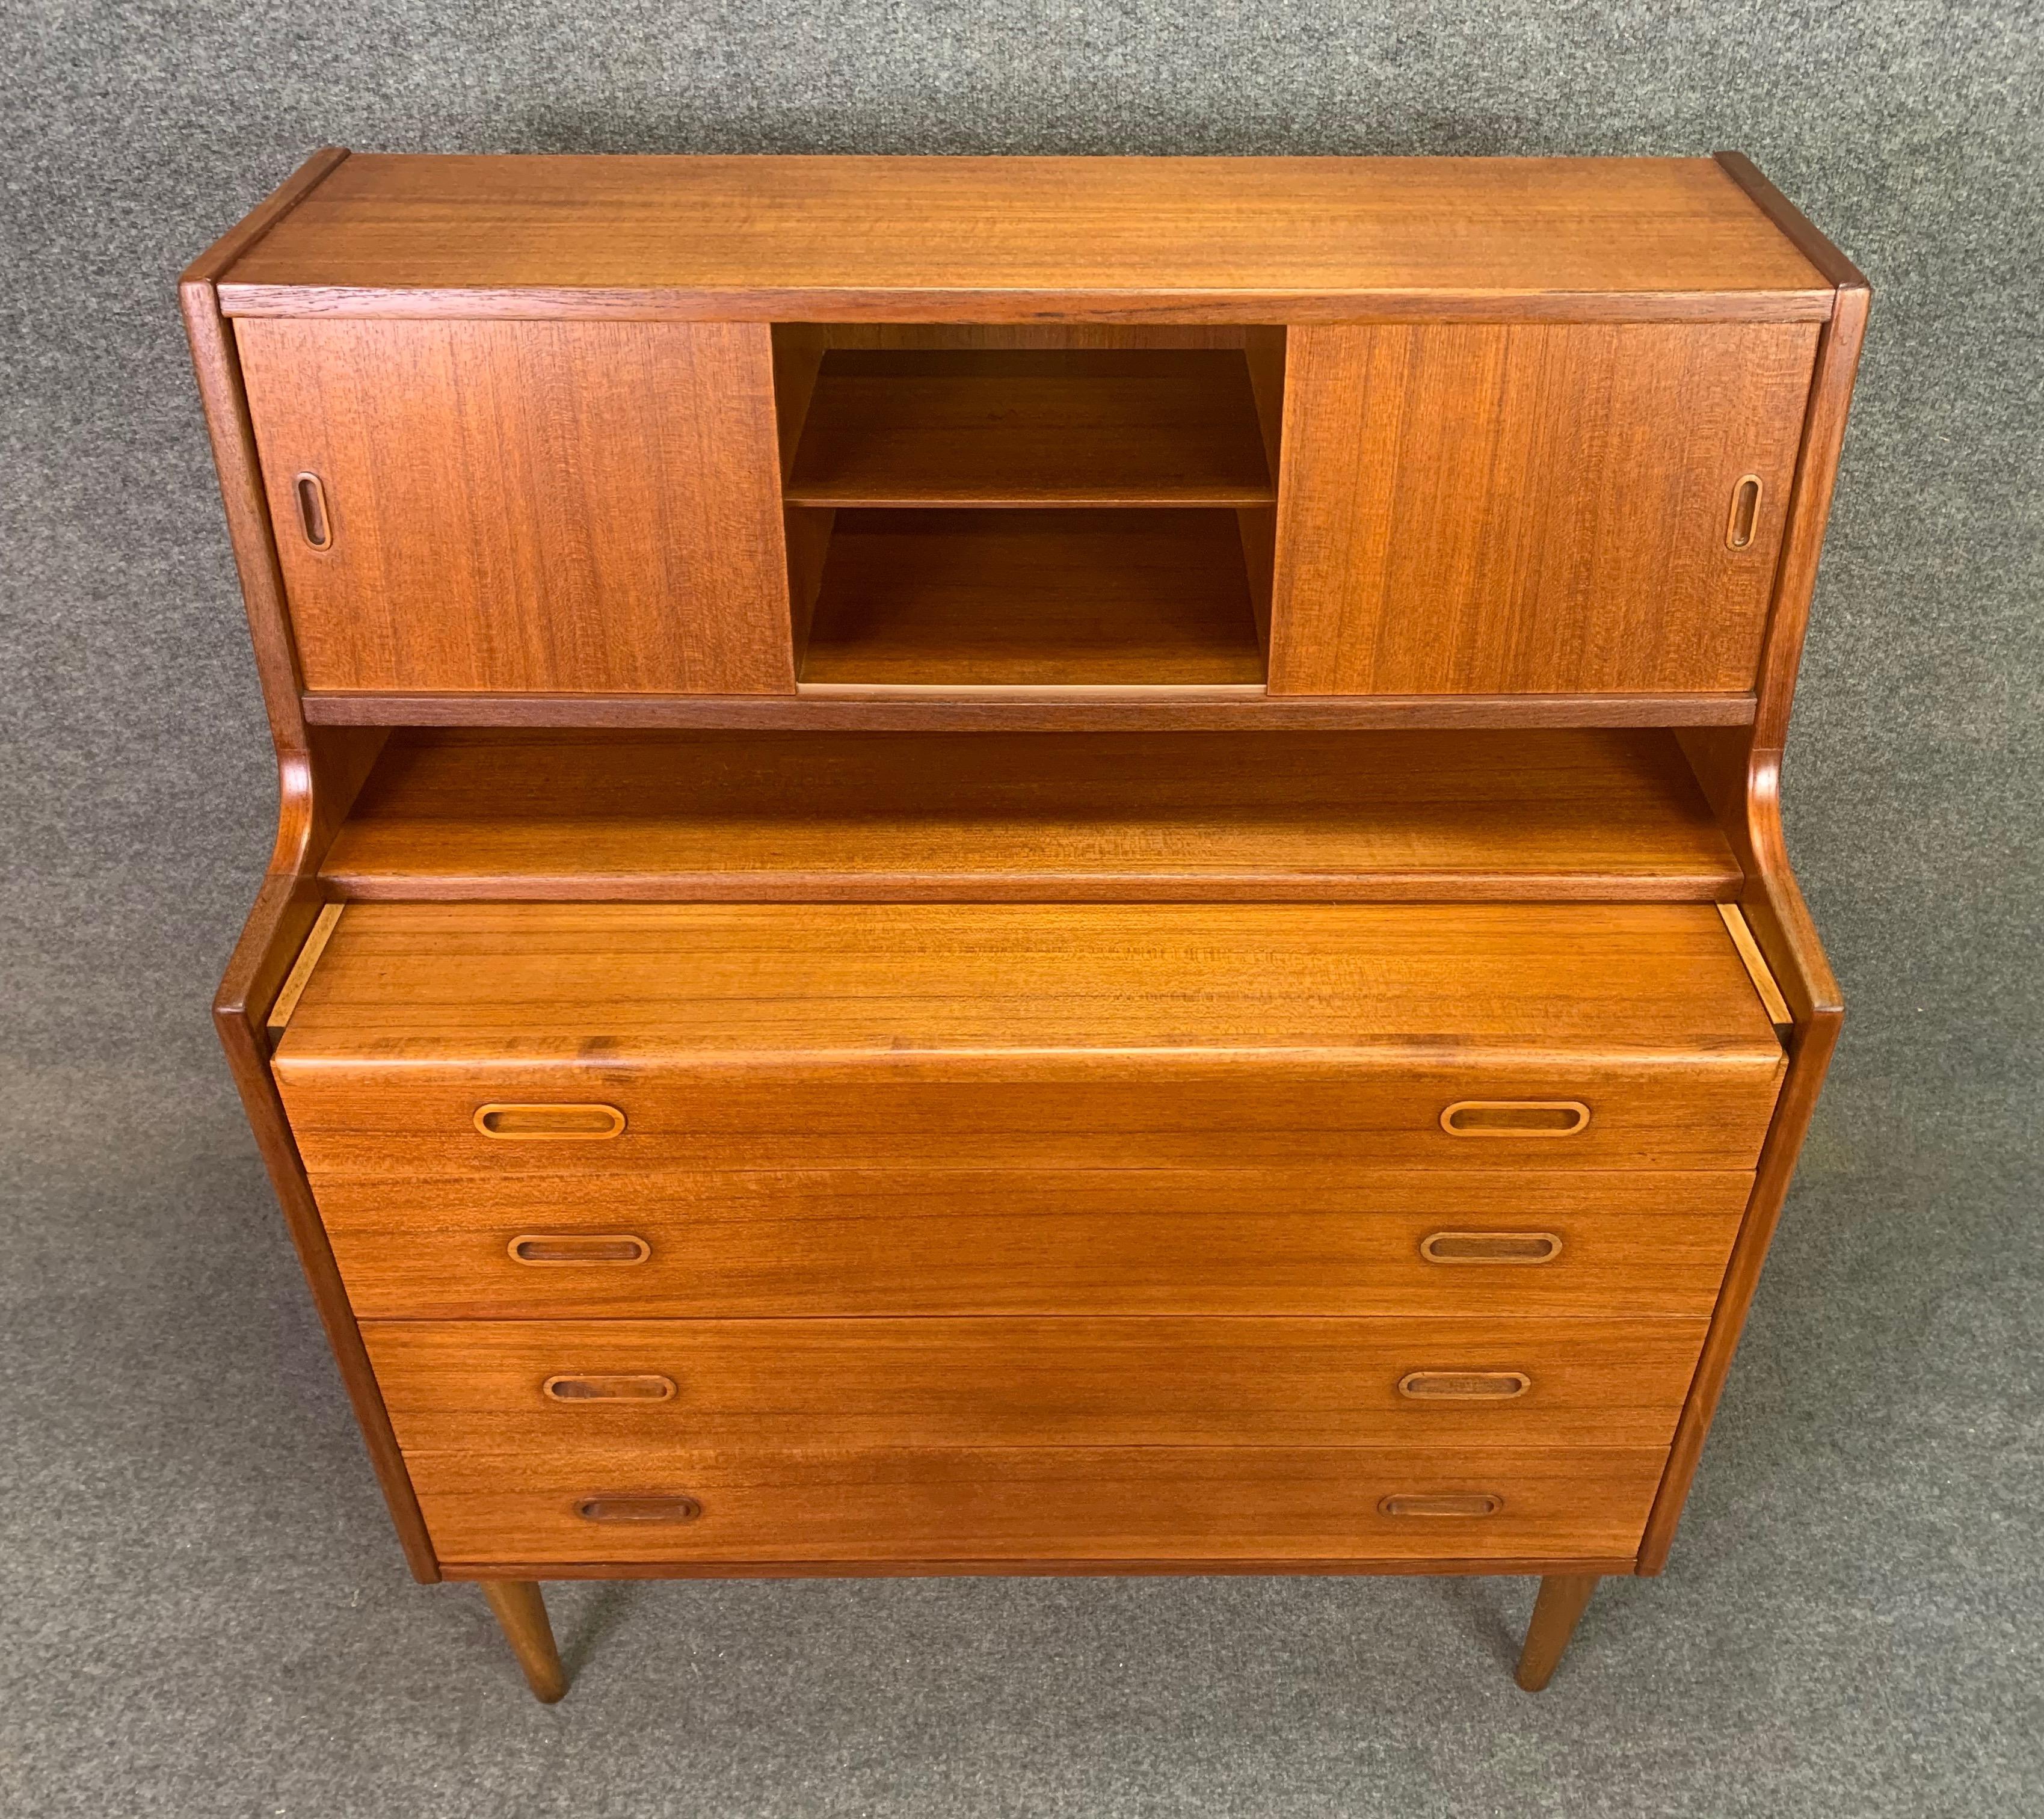 Here is a beautiful 1960s Scandinavian modern teak secretary desk recently imported from Denmark to California before its refinishing.
This very versatile case piece features a slide out drawer exposing a writing desk surface that lifts up to